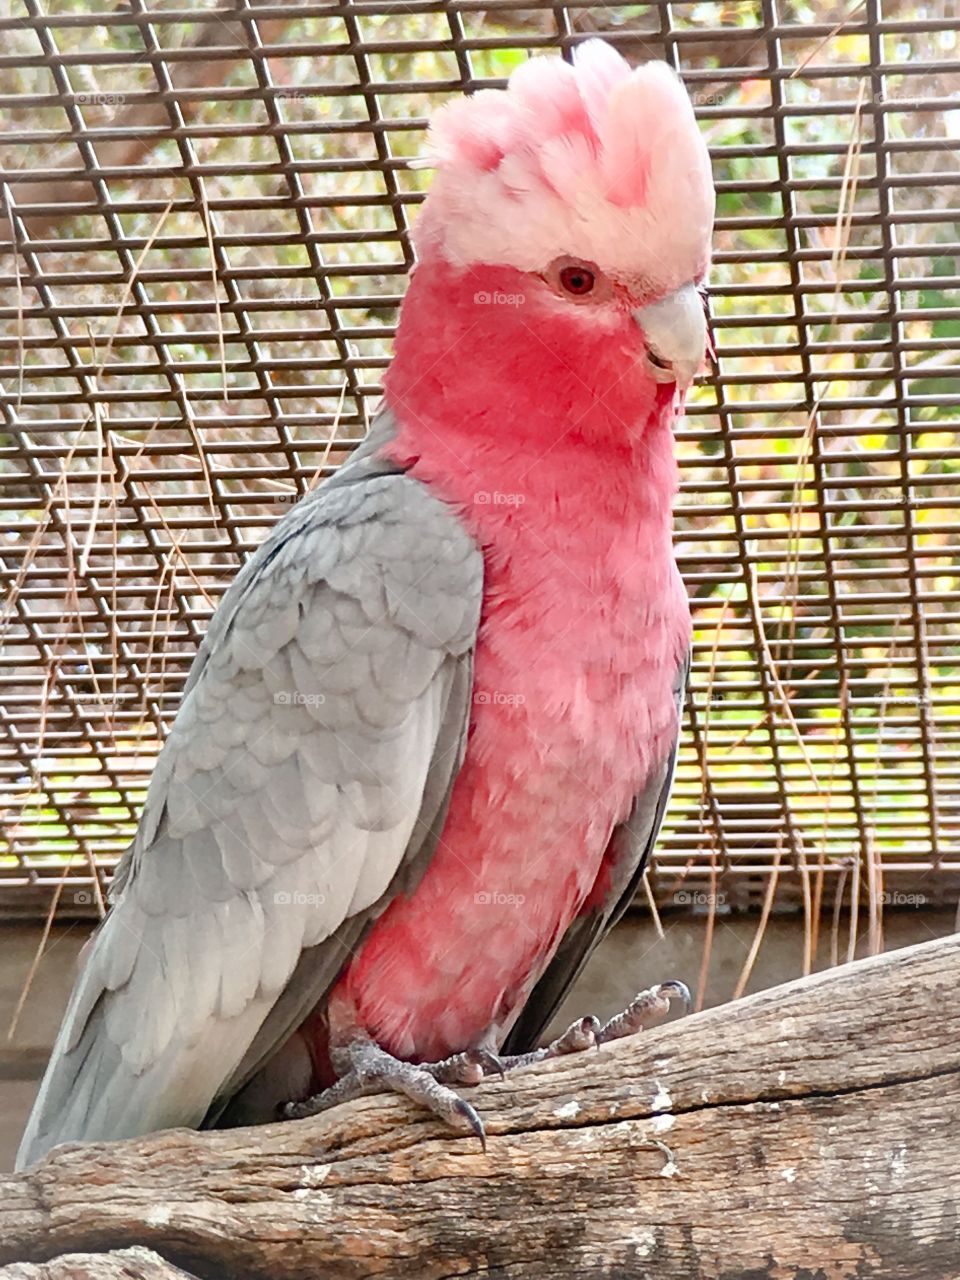 Galah rescue; close up of pink Galah perched in outdoor aviary 